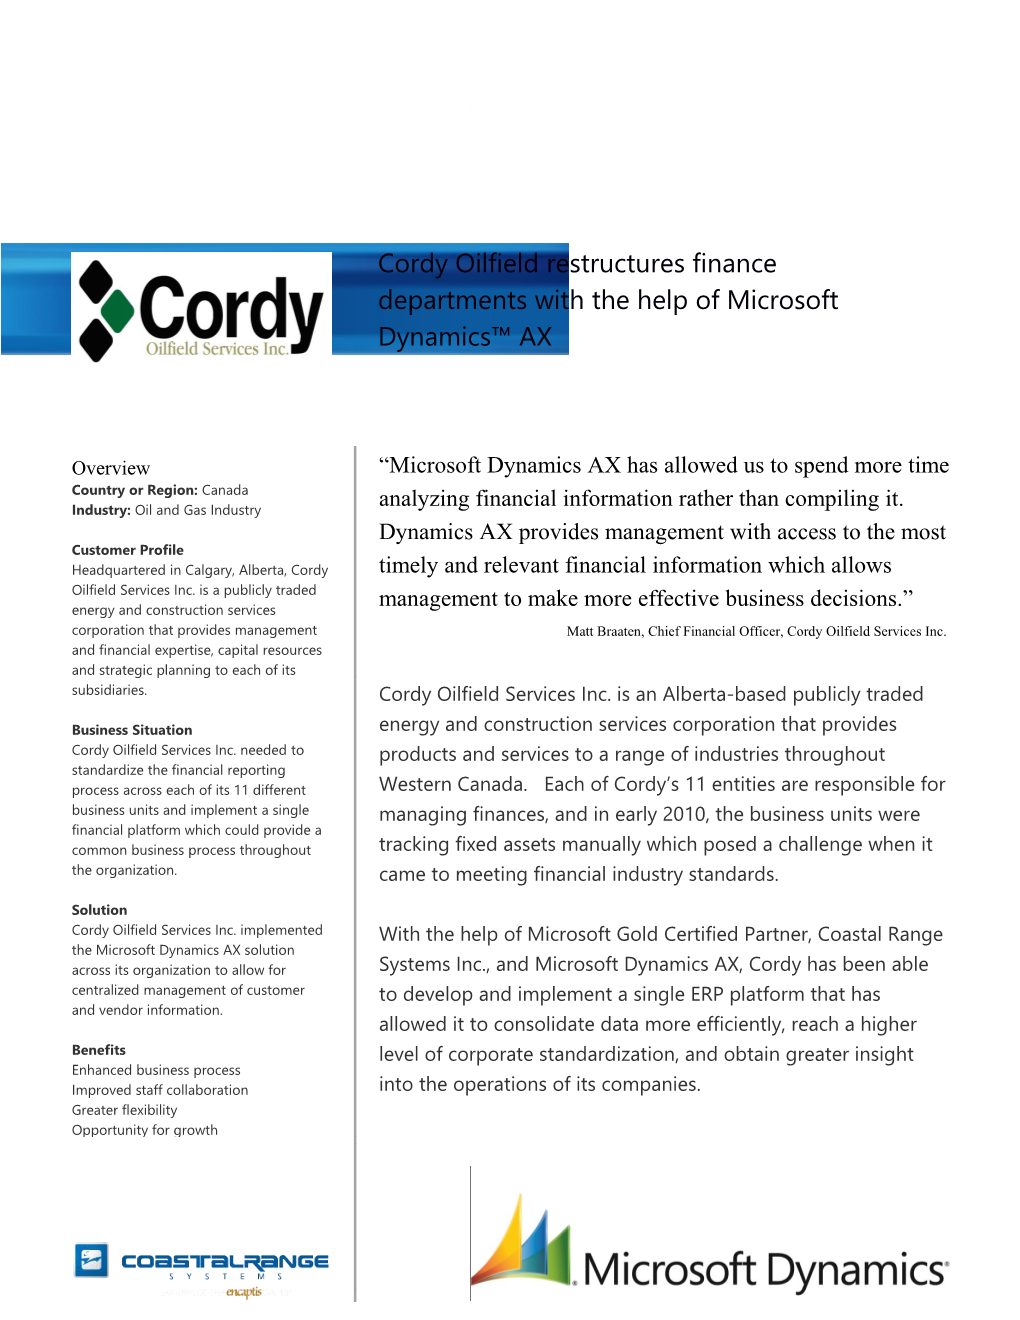 Metia CEP Cordy Oilfield Restructures Finance Departments with the Help of Microsoft Dynamics